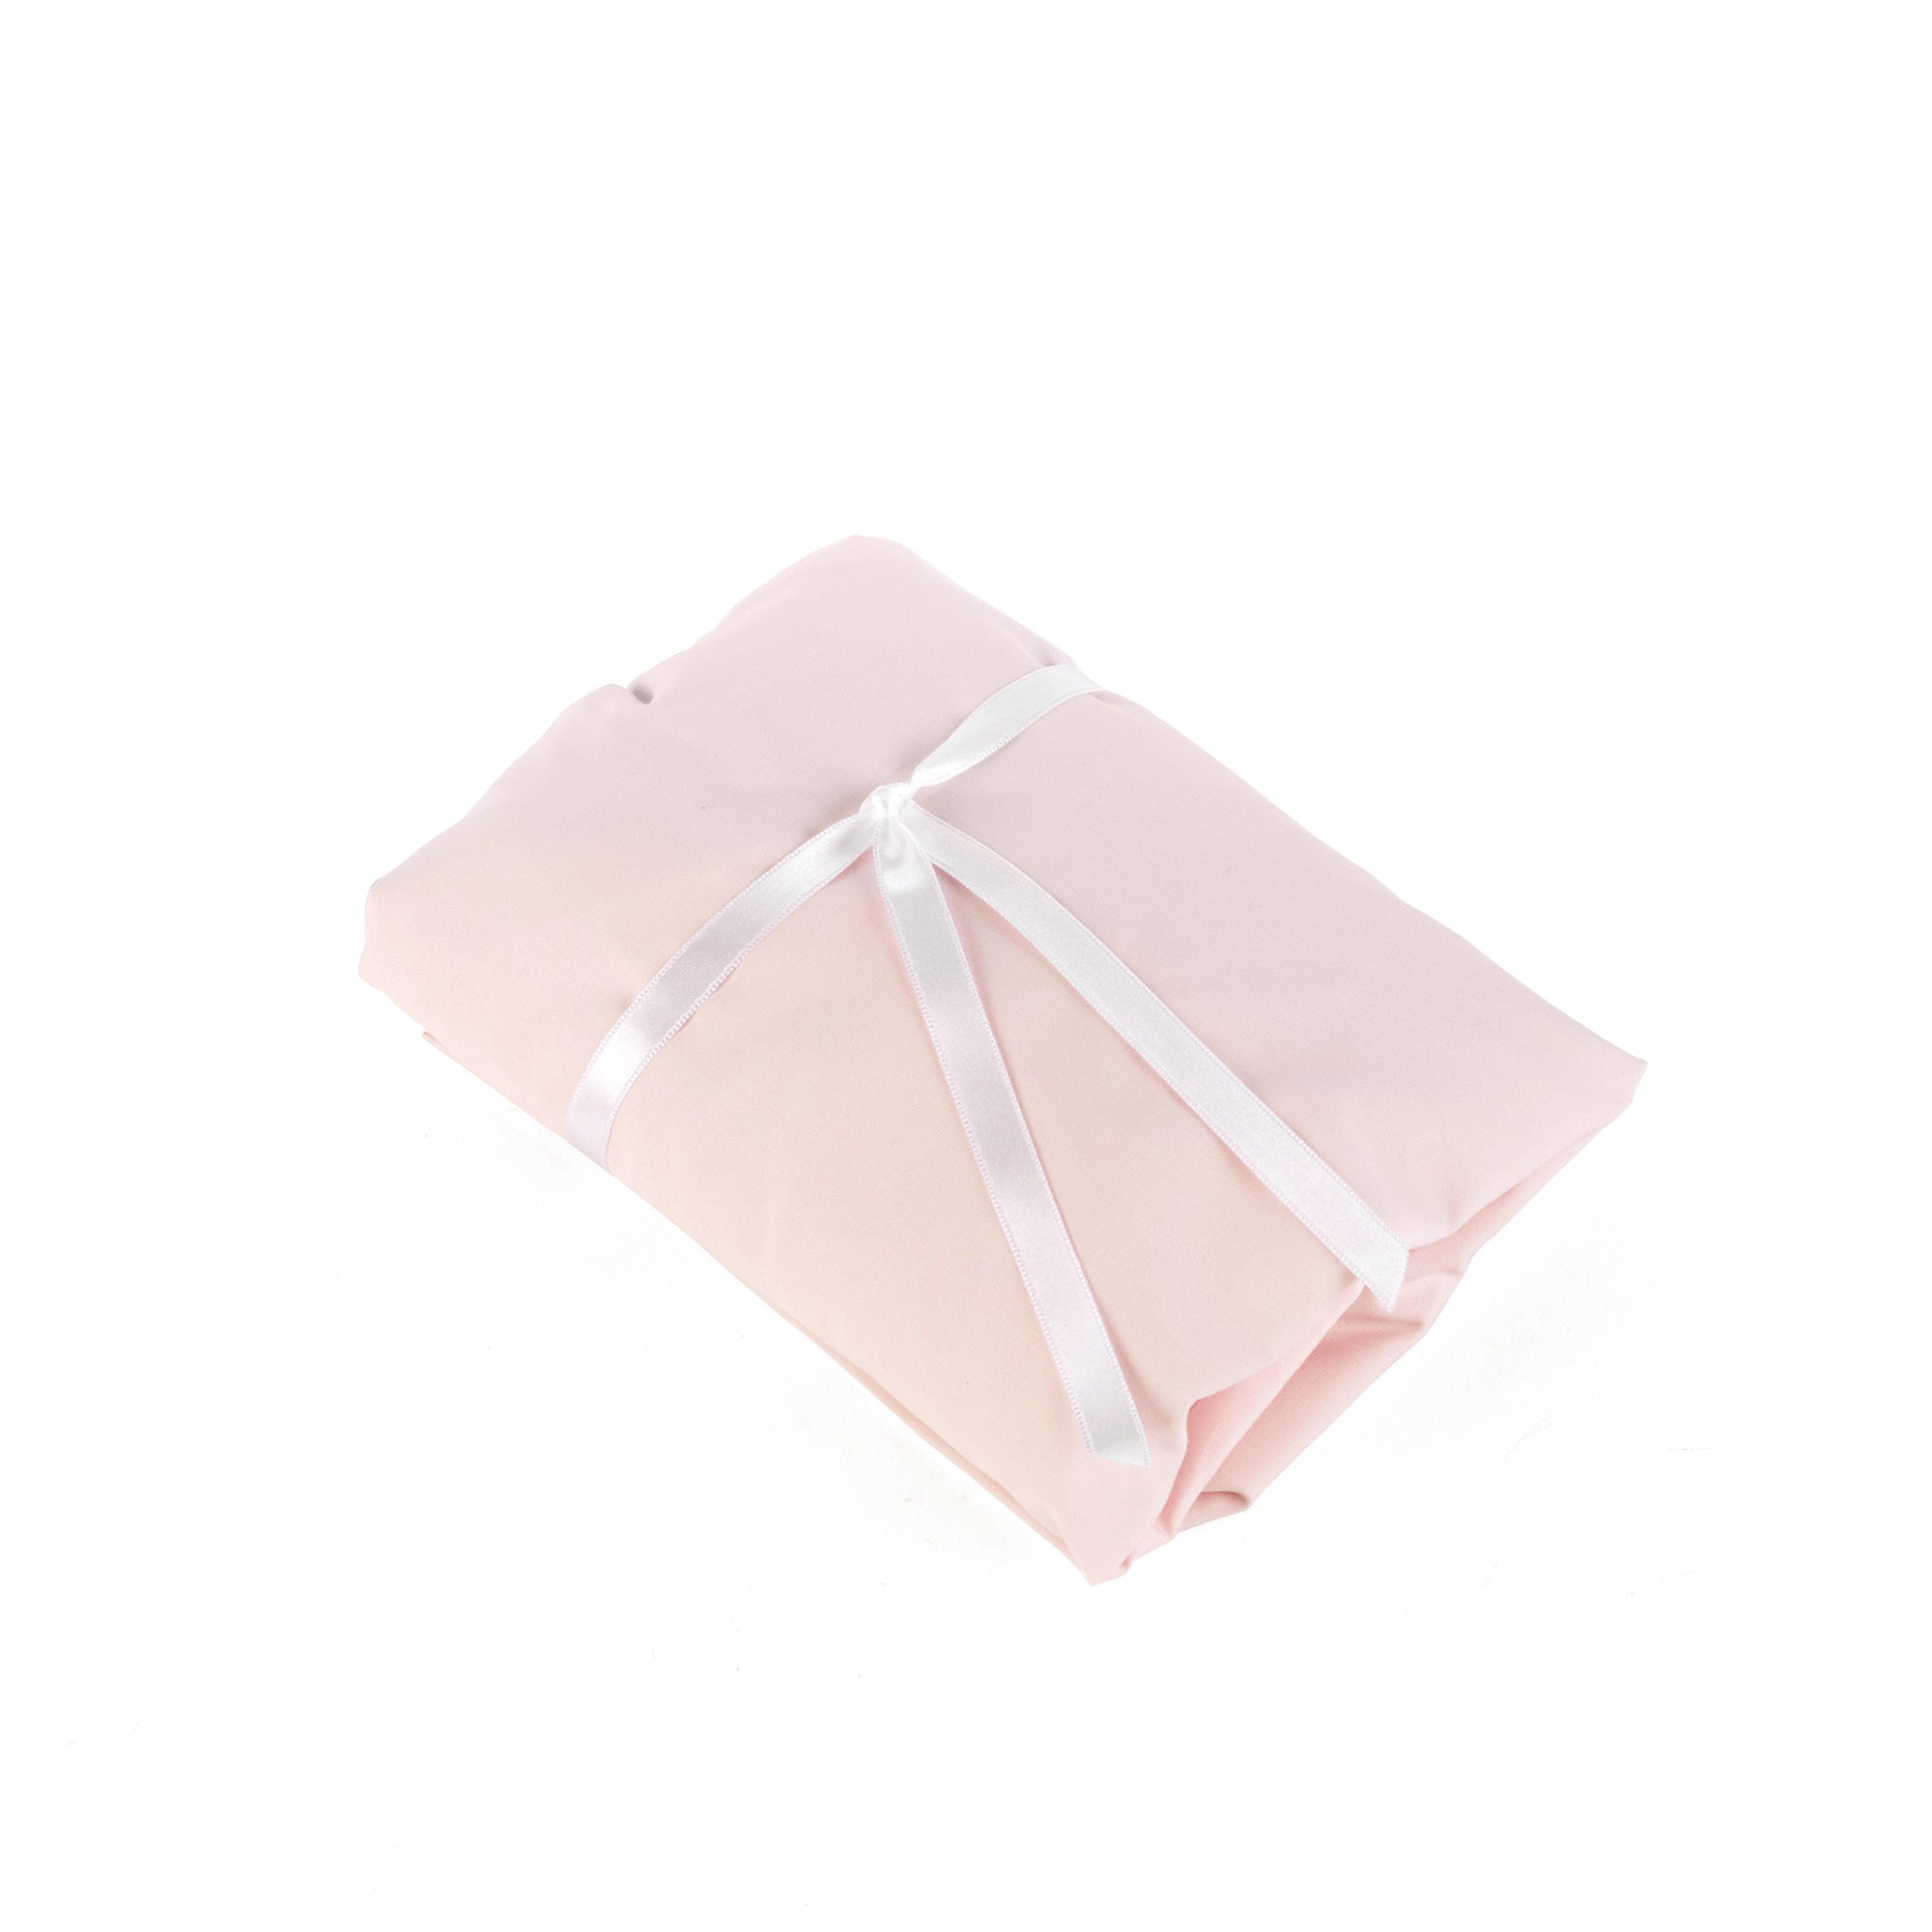 Theophile & Patachou Cot Bed Fitted Sheet 60 x 120 cm - Cotton Pink